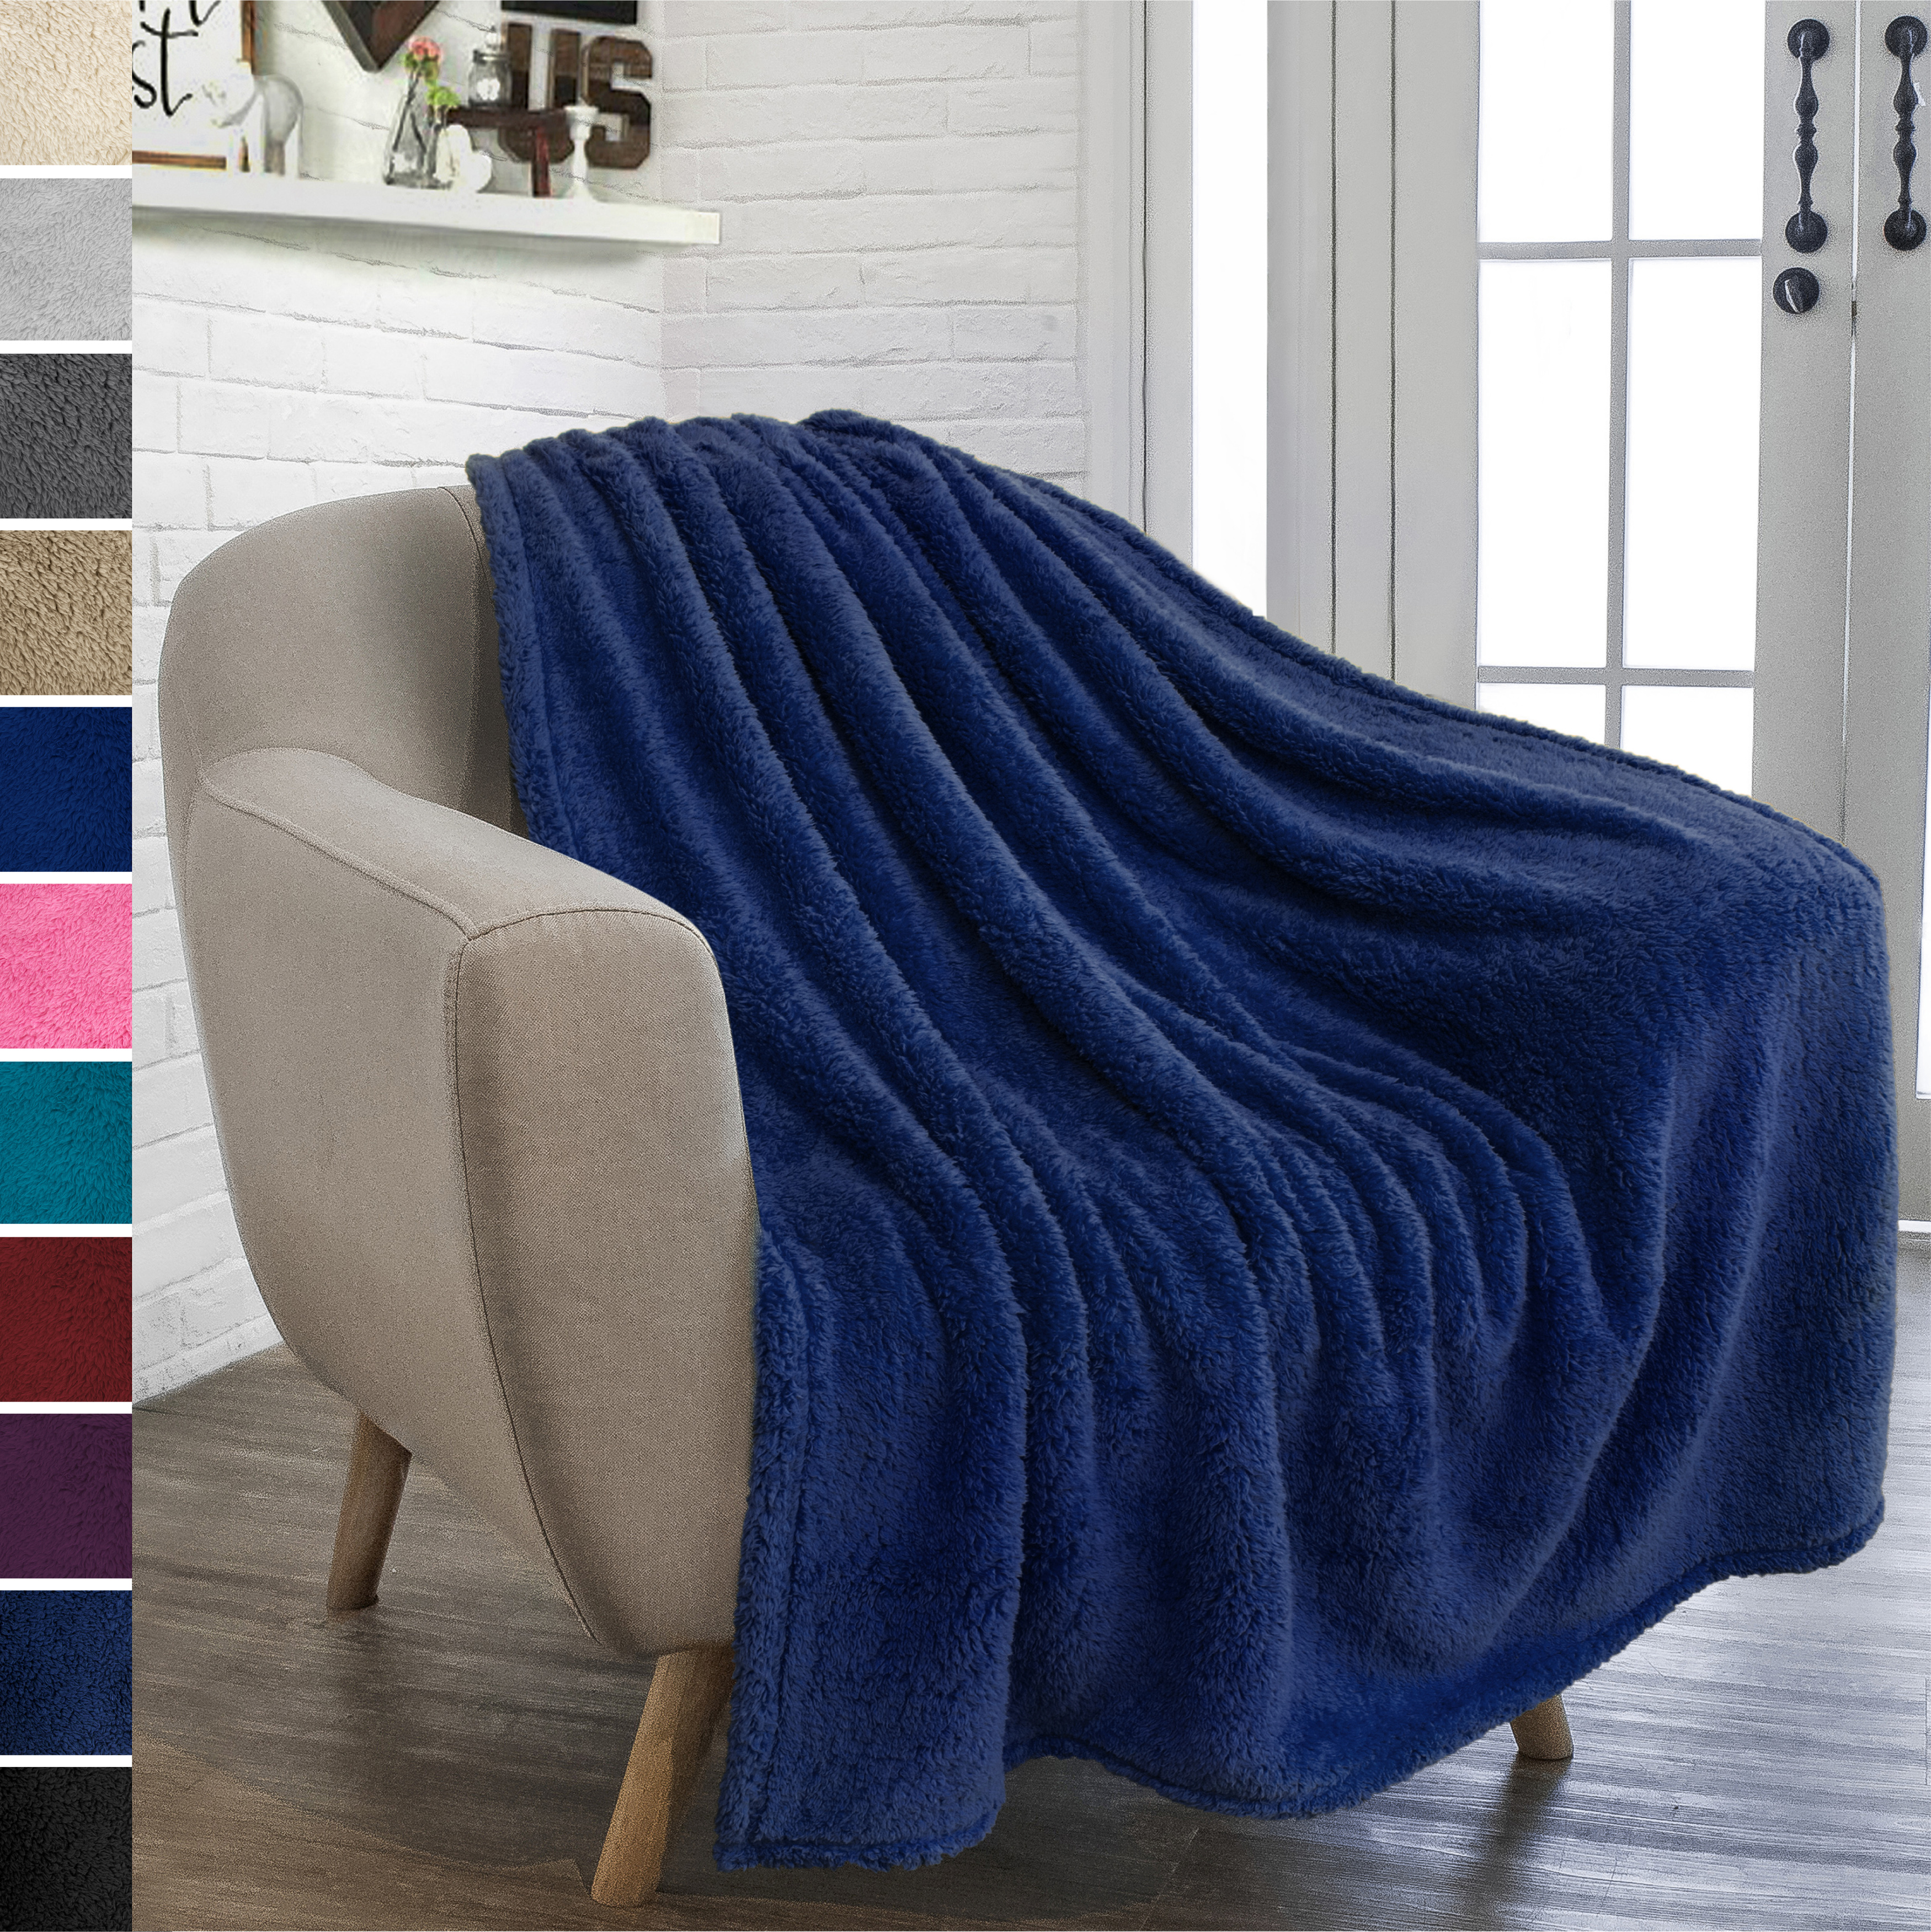 Soft Sherpa Faux Fur Blankets for Sofa Couch Bed Fleece Throw Blanket Blue Cozy Warm Throws for Kids Adult 50x60 inch 